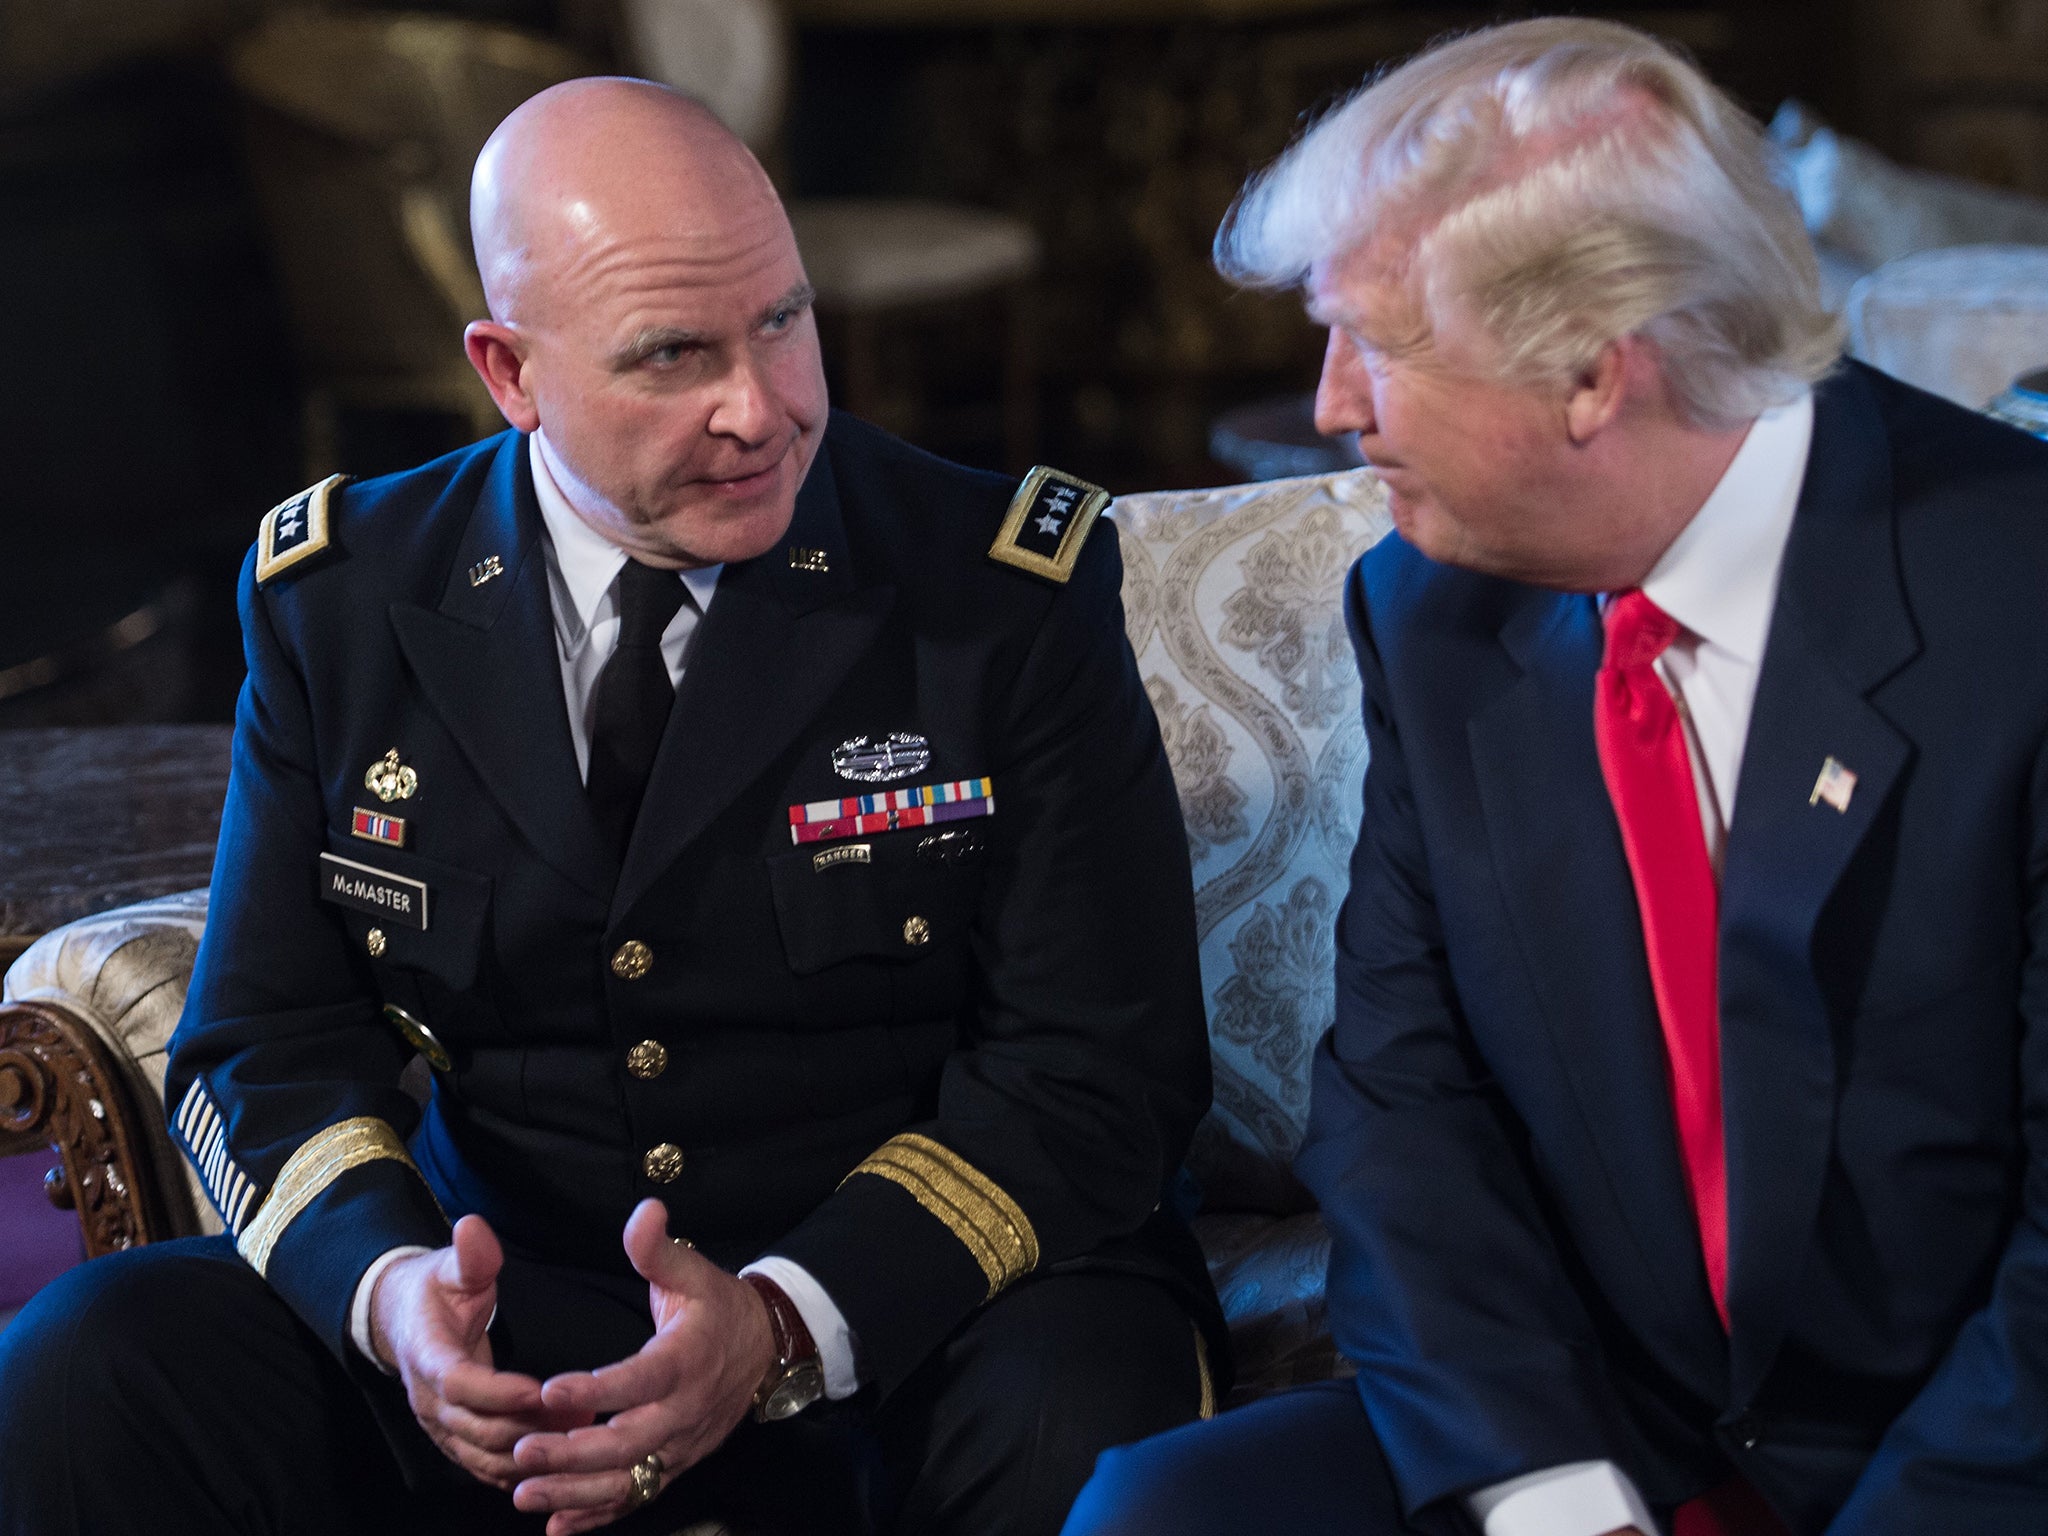 Donald Trump with his new National Security Advisor Lt General HR McMaster